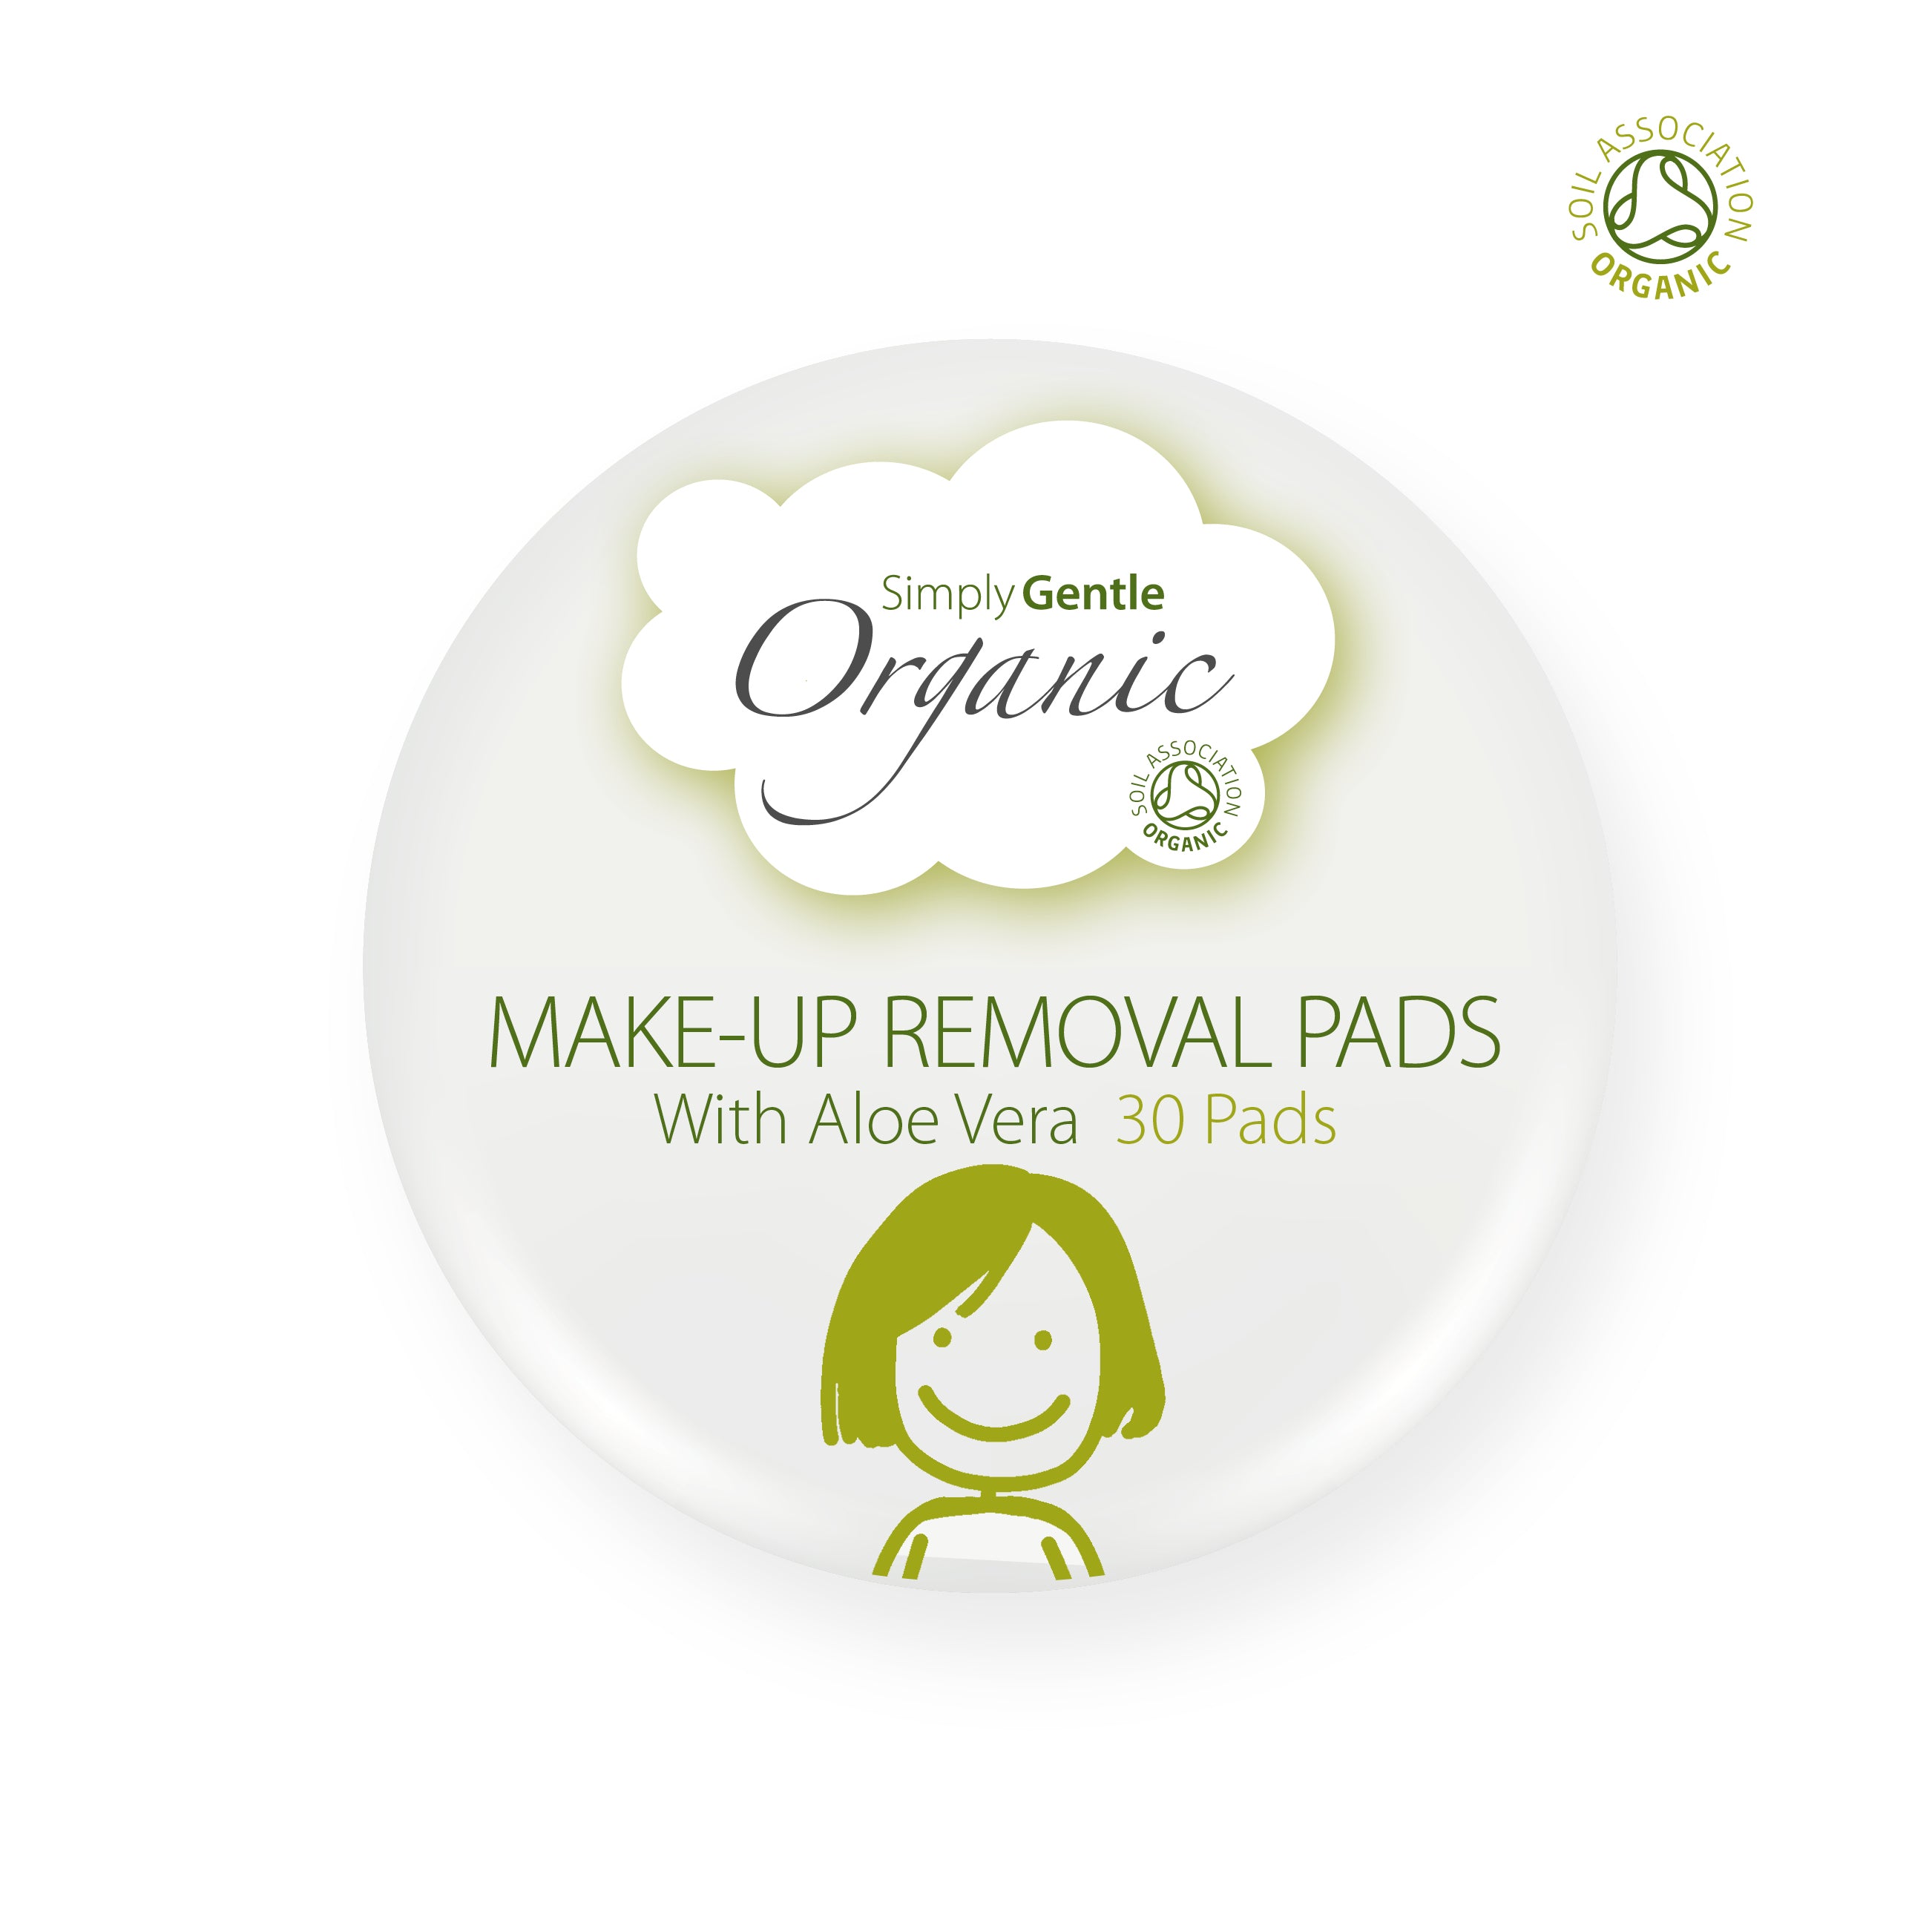 Simply Gentle Organic Makeup Removal Pads